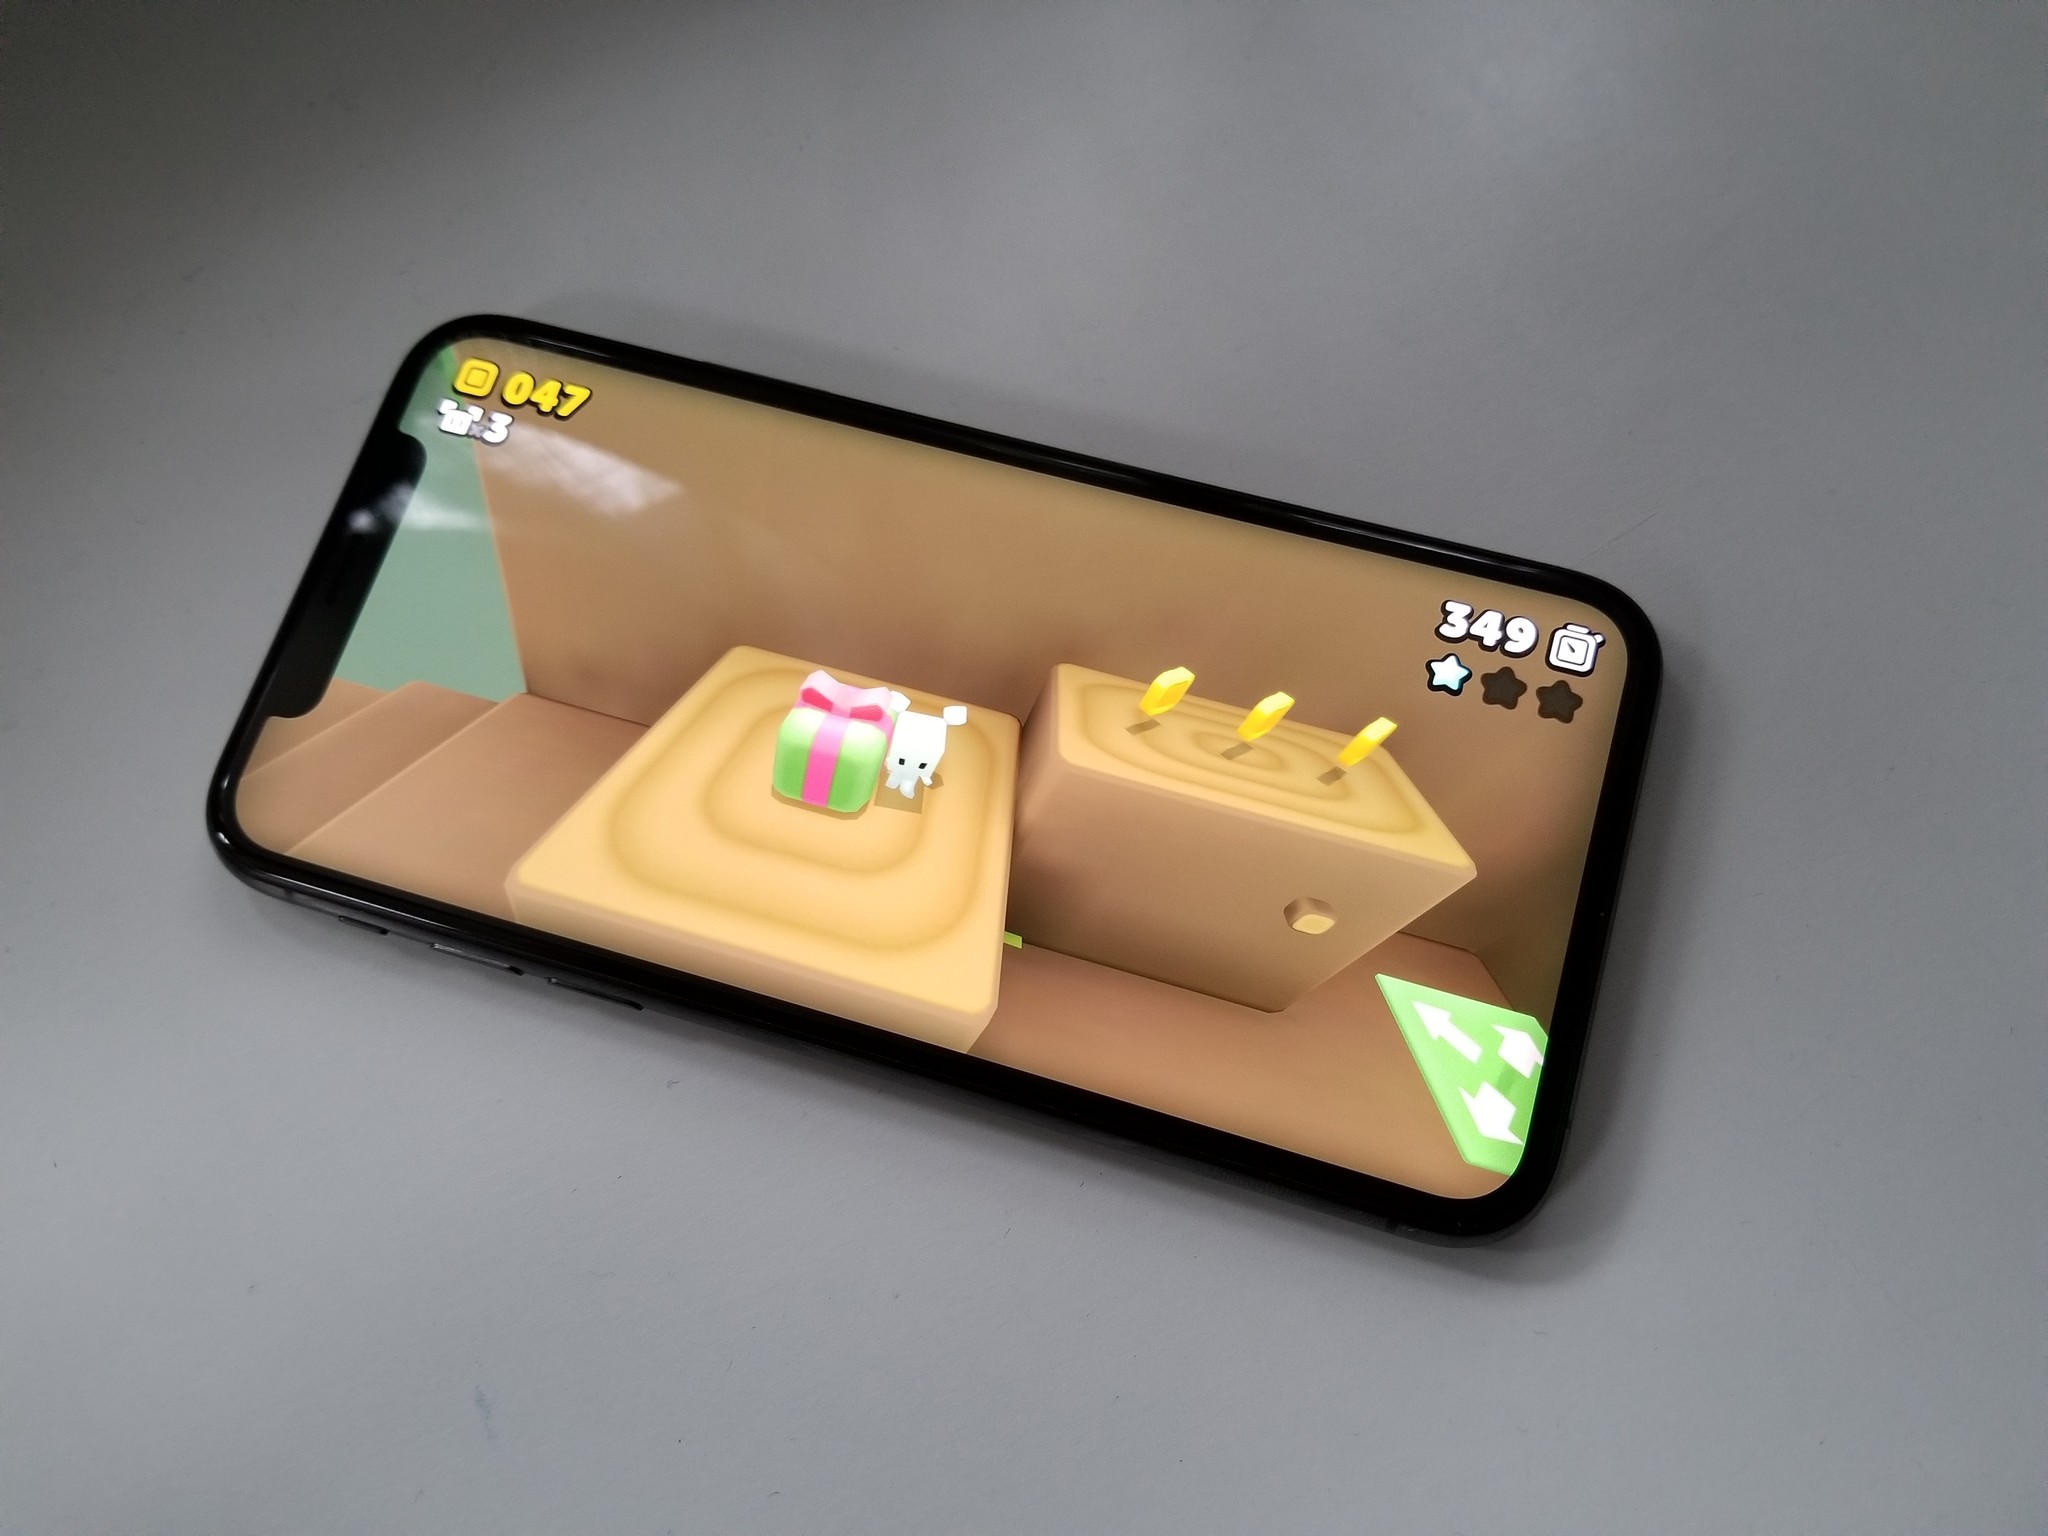 Suzy Cube on iPhone XS